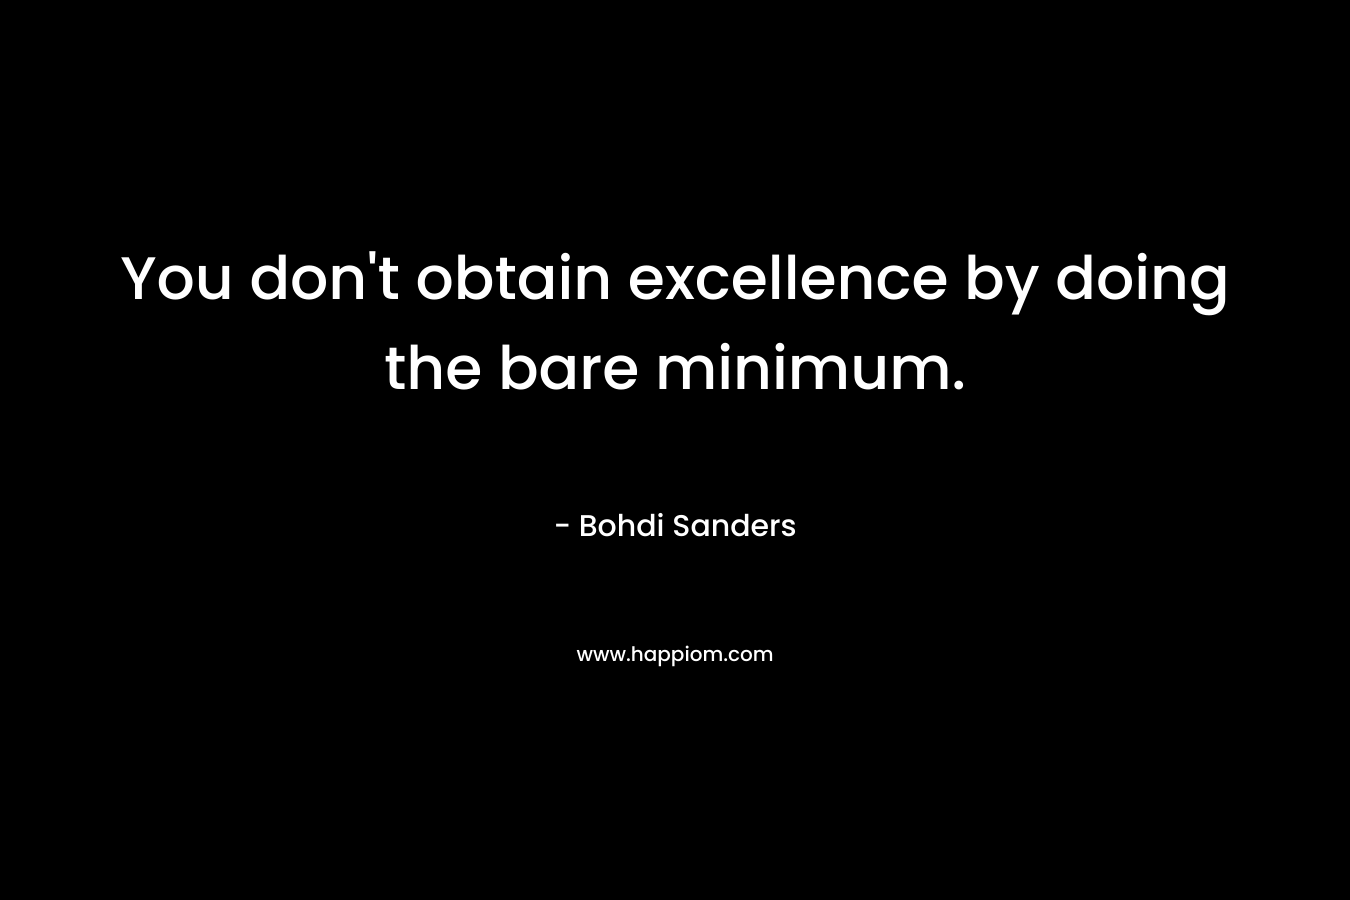 You don't obtain excellence by doing the bare minimum.